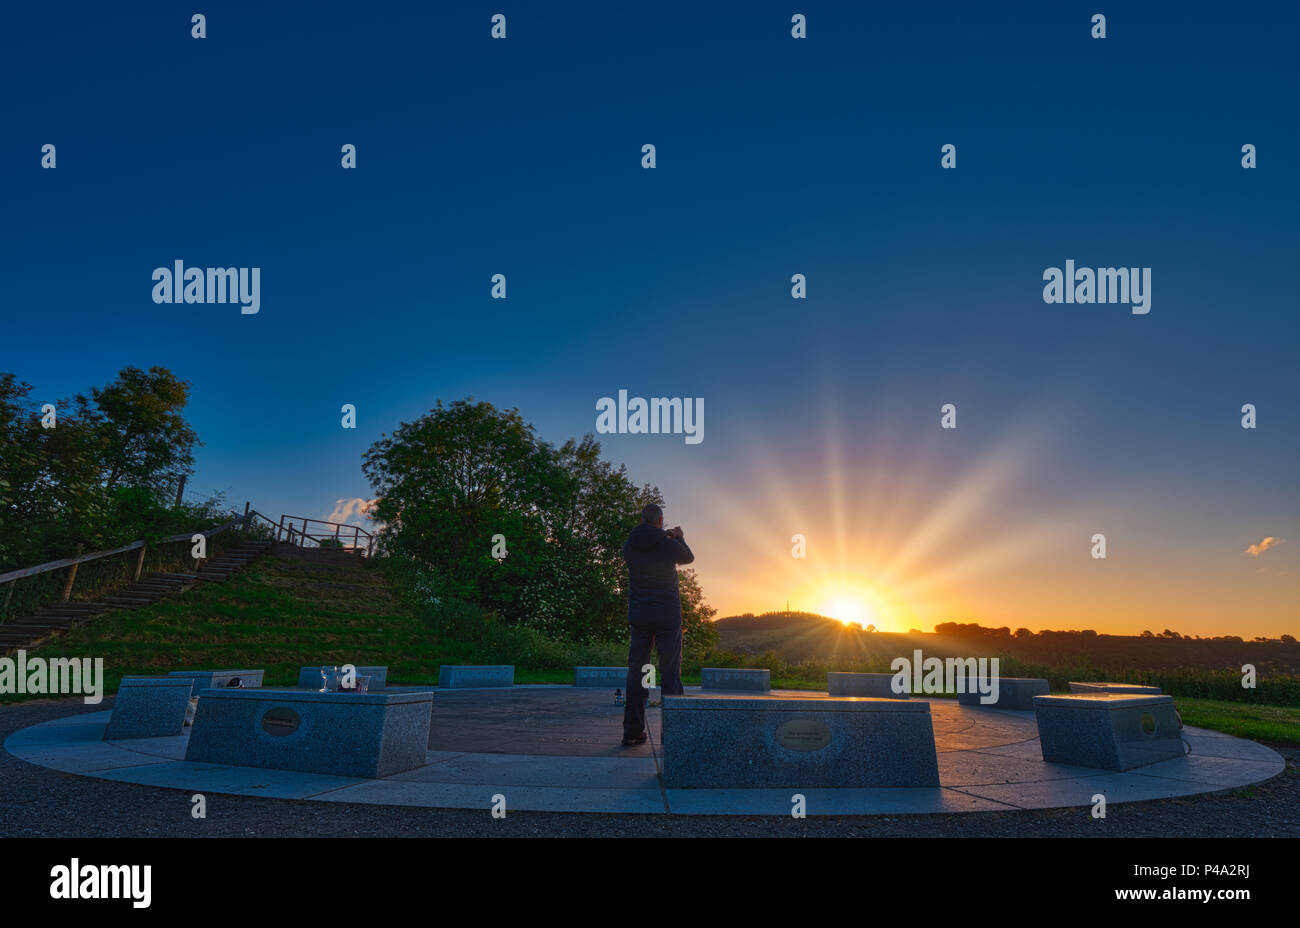 Wirksworth, Derbyshire, UK. 21st June, 2018. Summer solstice UK: Pagan’s celebrating the sun rising on the summer estival solstice at the star disc above Wirksworth in the Derbyshire Dales. UK Weather, sunrise in Derbyshire of the longest day of the year. Credit: Doug Blane/Alamy Live News Stock Photo